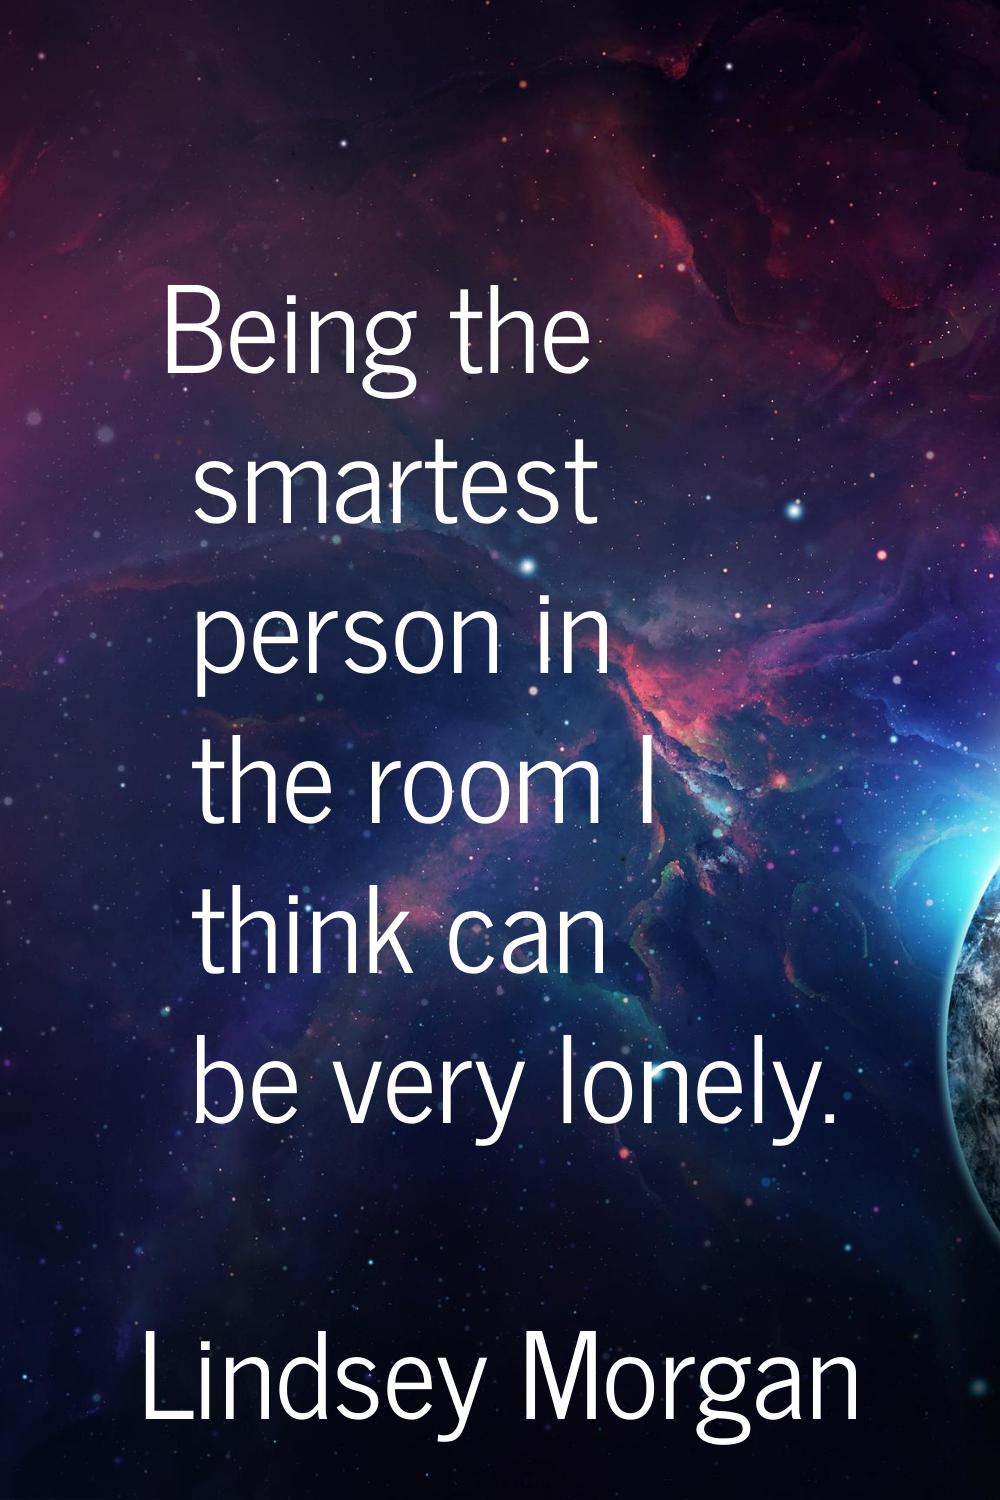 Being the smartest person in the room I think can be very lonely.